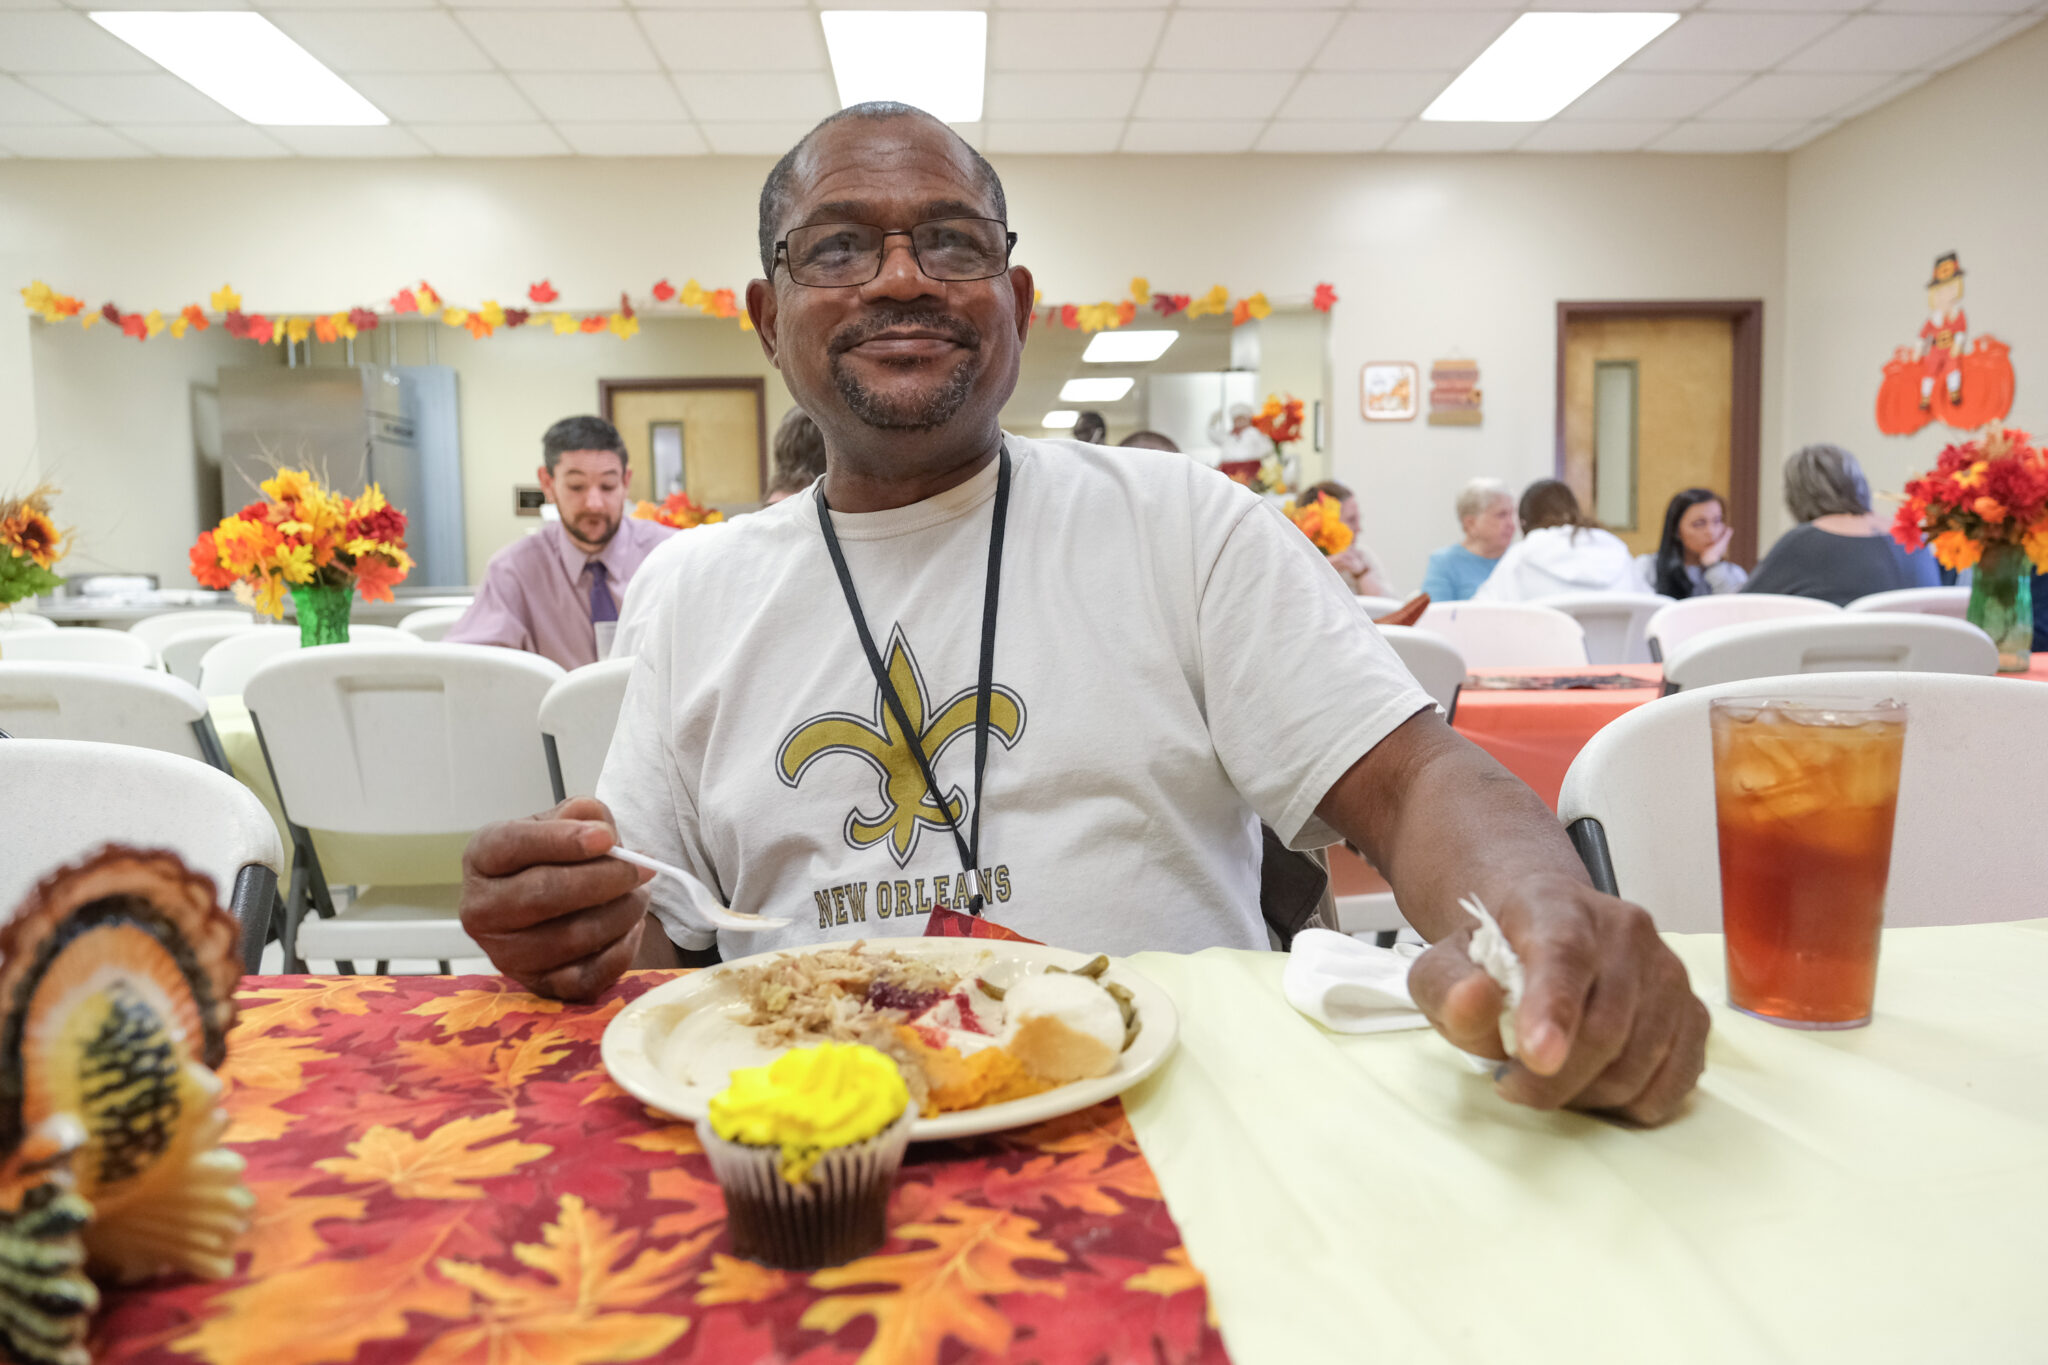 More than a meal, this local nonprofit makes an amazing impact + you can, too